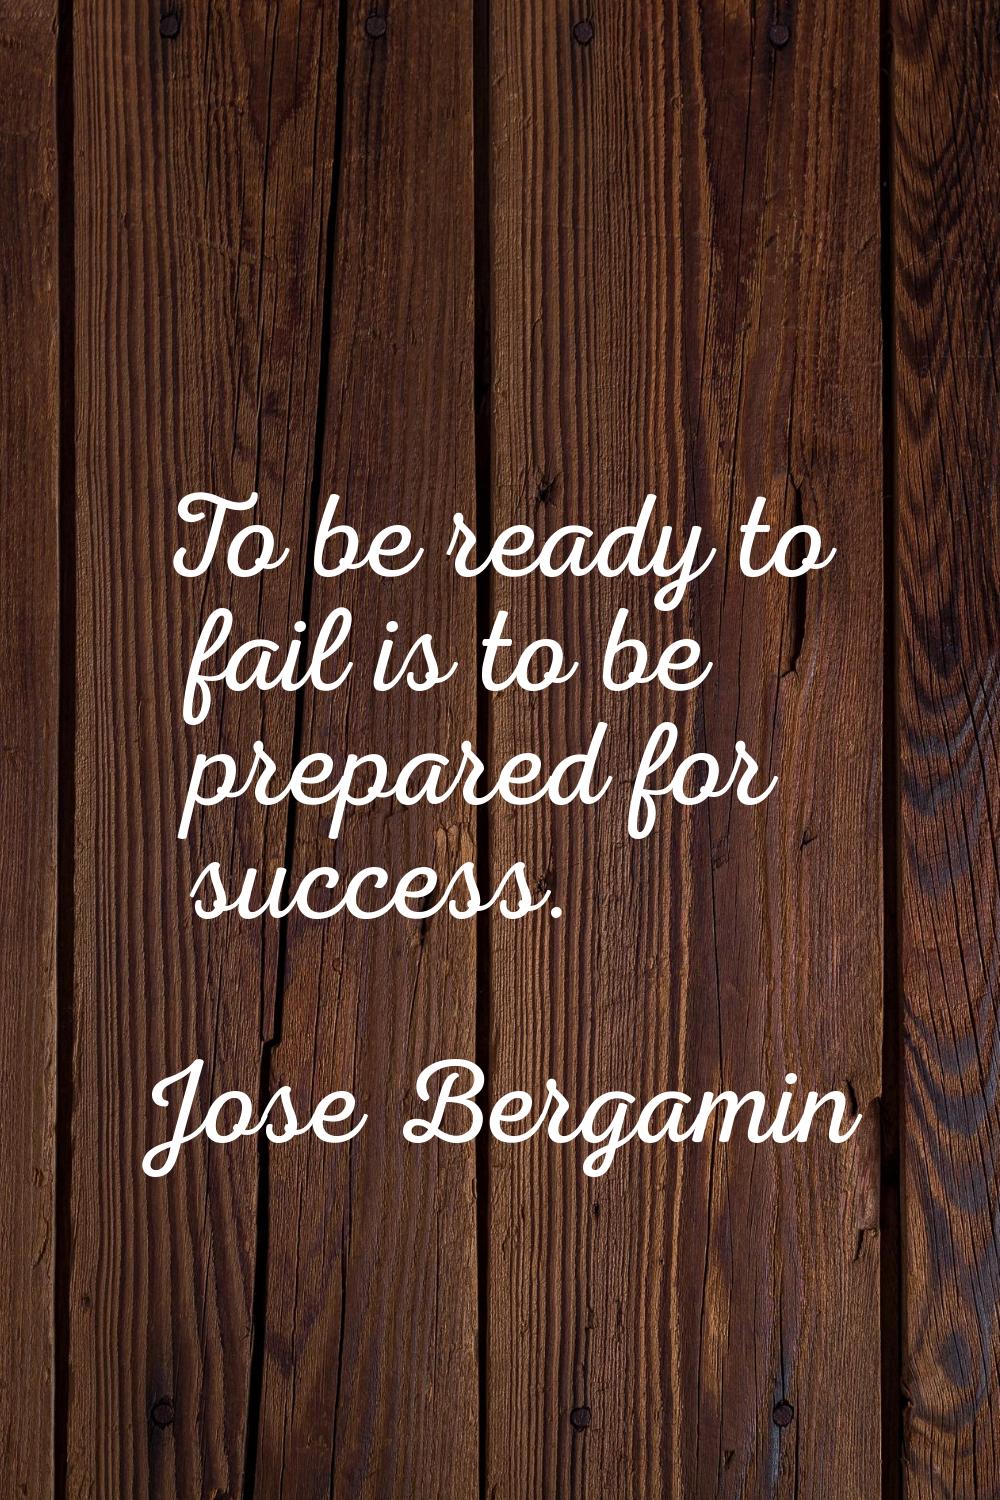 To be ready to fail is to be prepared for success.